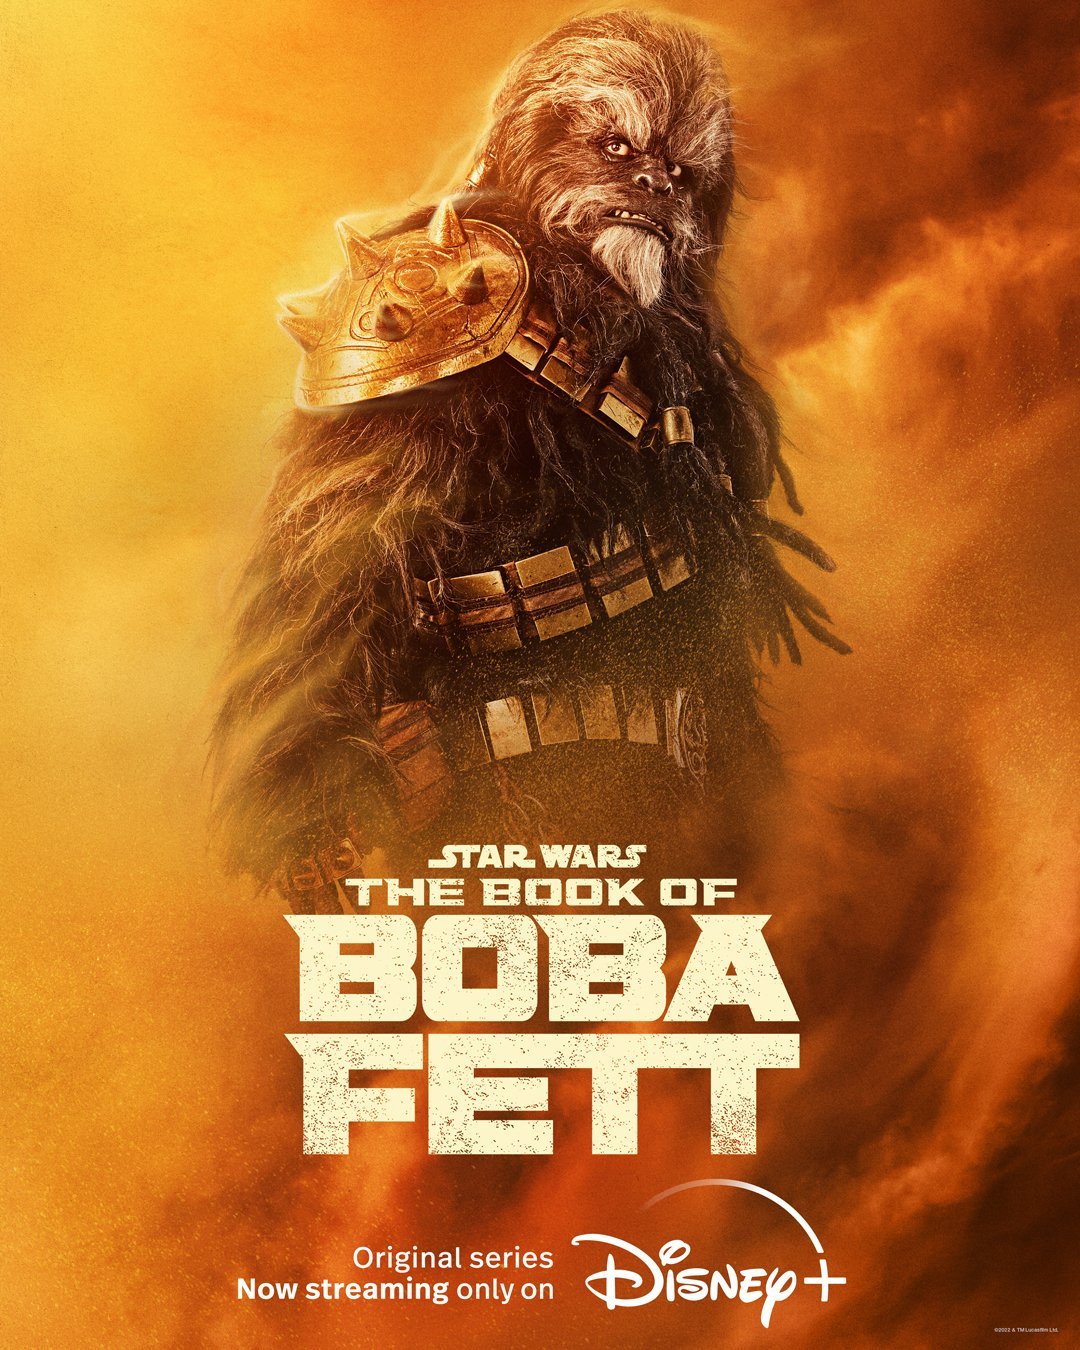 Black Krssantan Character Poster in The Book of Boba Fett